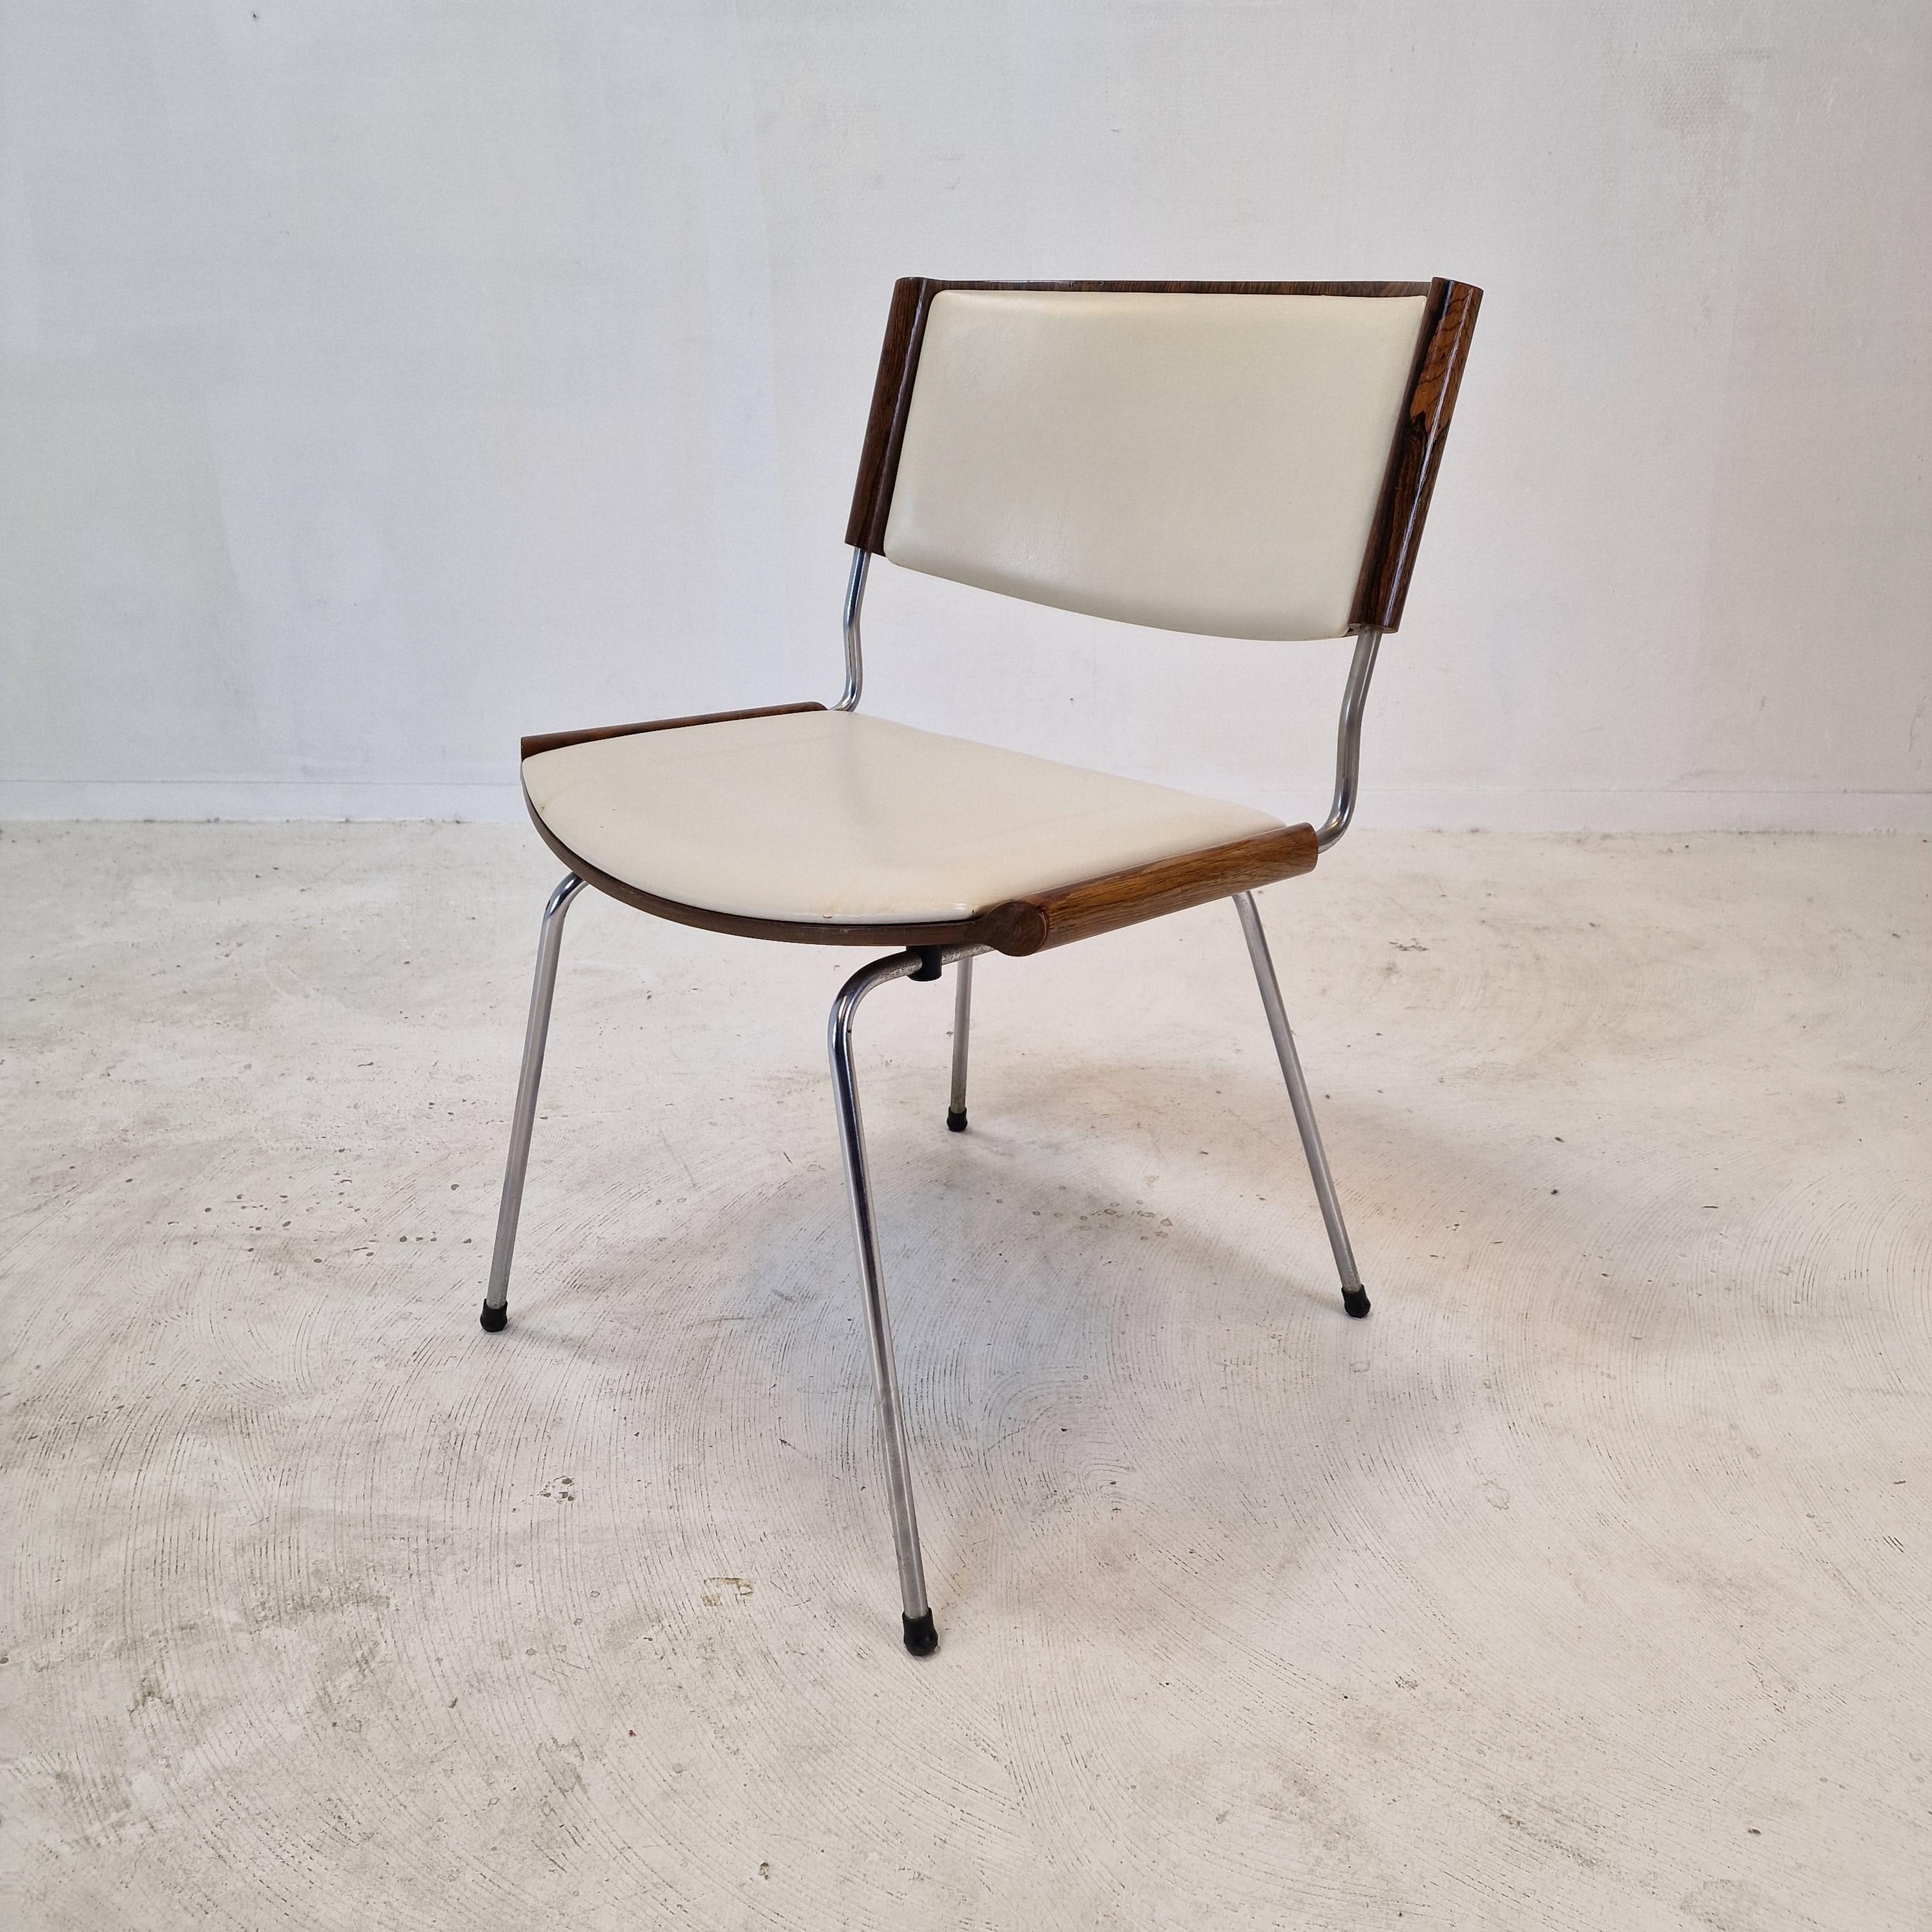 Set of 4 Badminton ND 150 dining chairs by Nanna Ditzel for Kolds Savvaerk, Denmark.
Design 1958, production in the 1960s. 

Please take notice of the very nice nut wood seat and backrest.

These wonderful chairs have the original skai